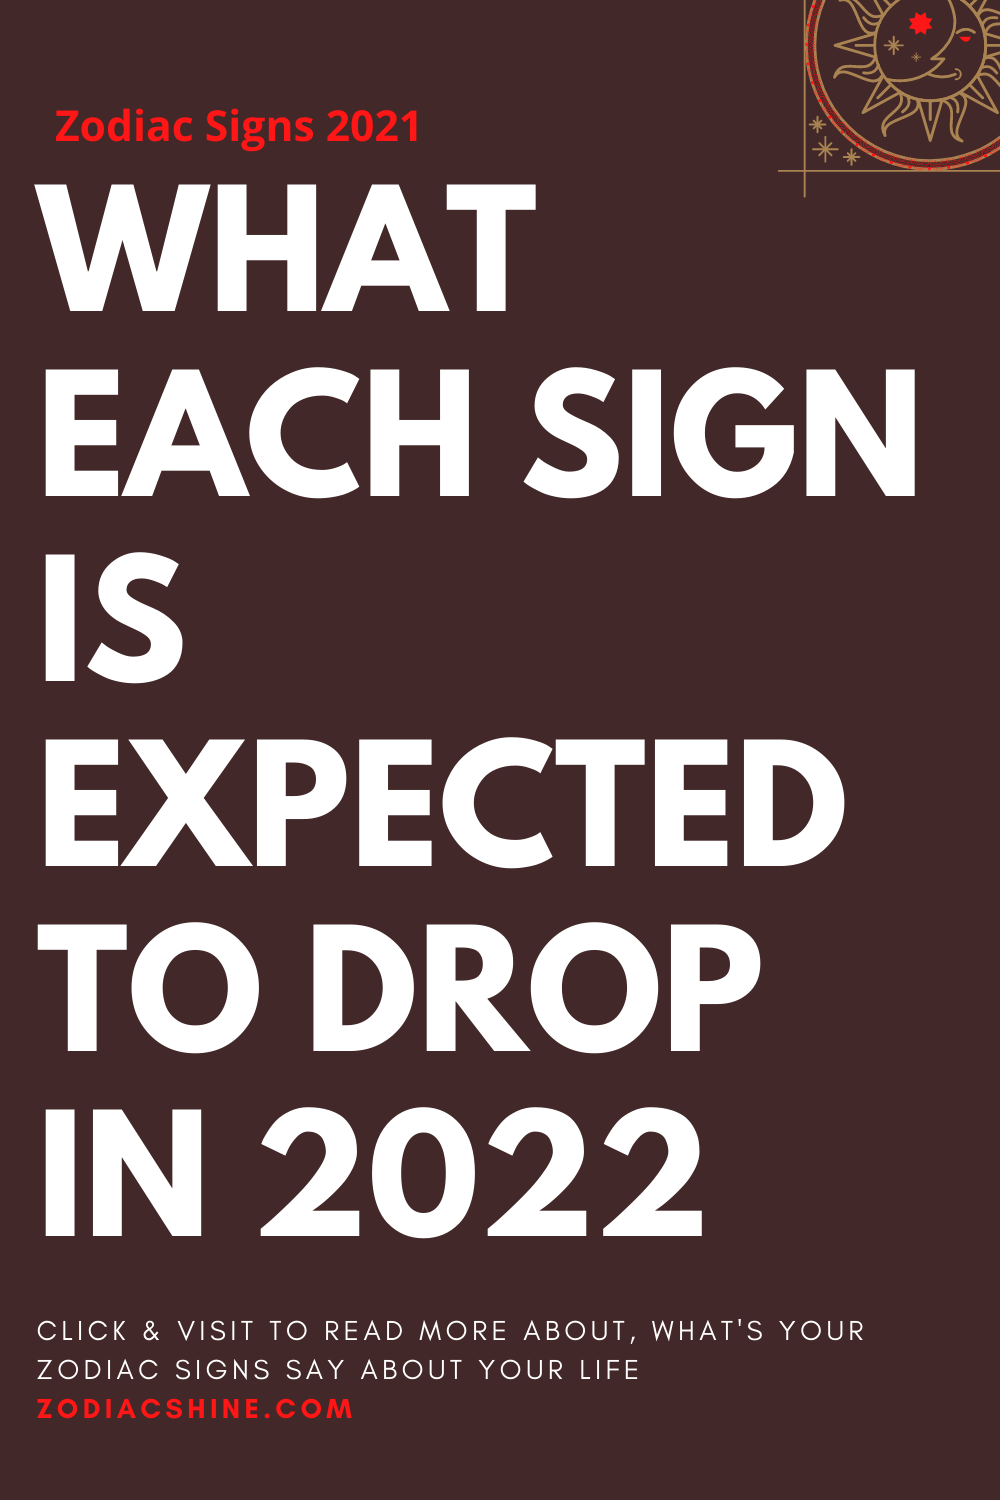 WHAT EACH SIGN IS EXPECTED TO DROP IN 2022